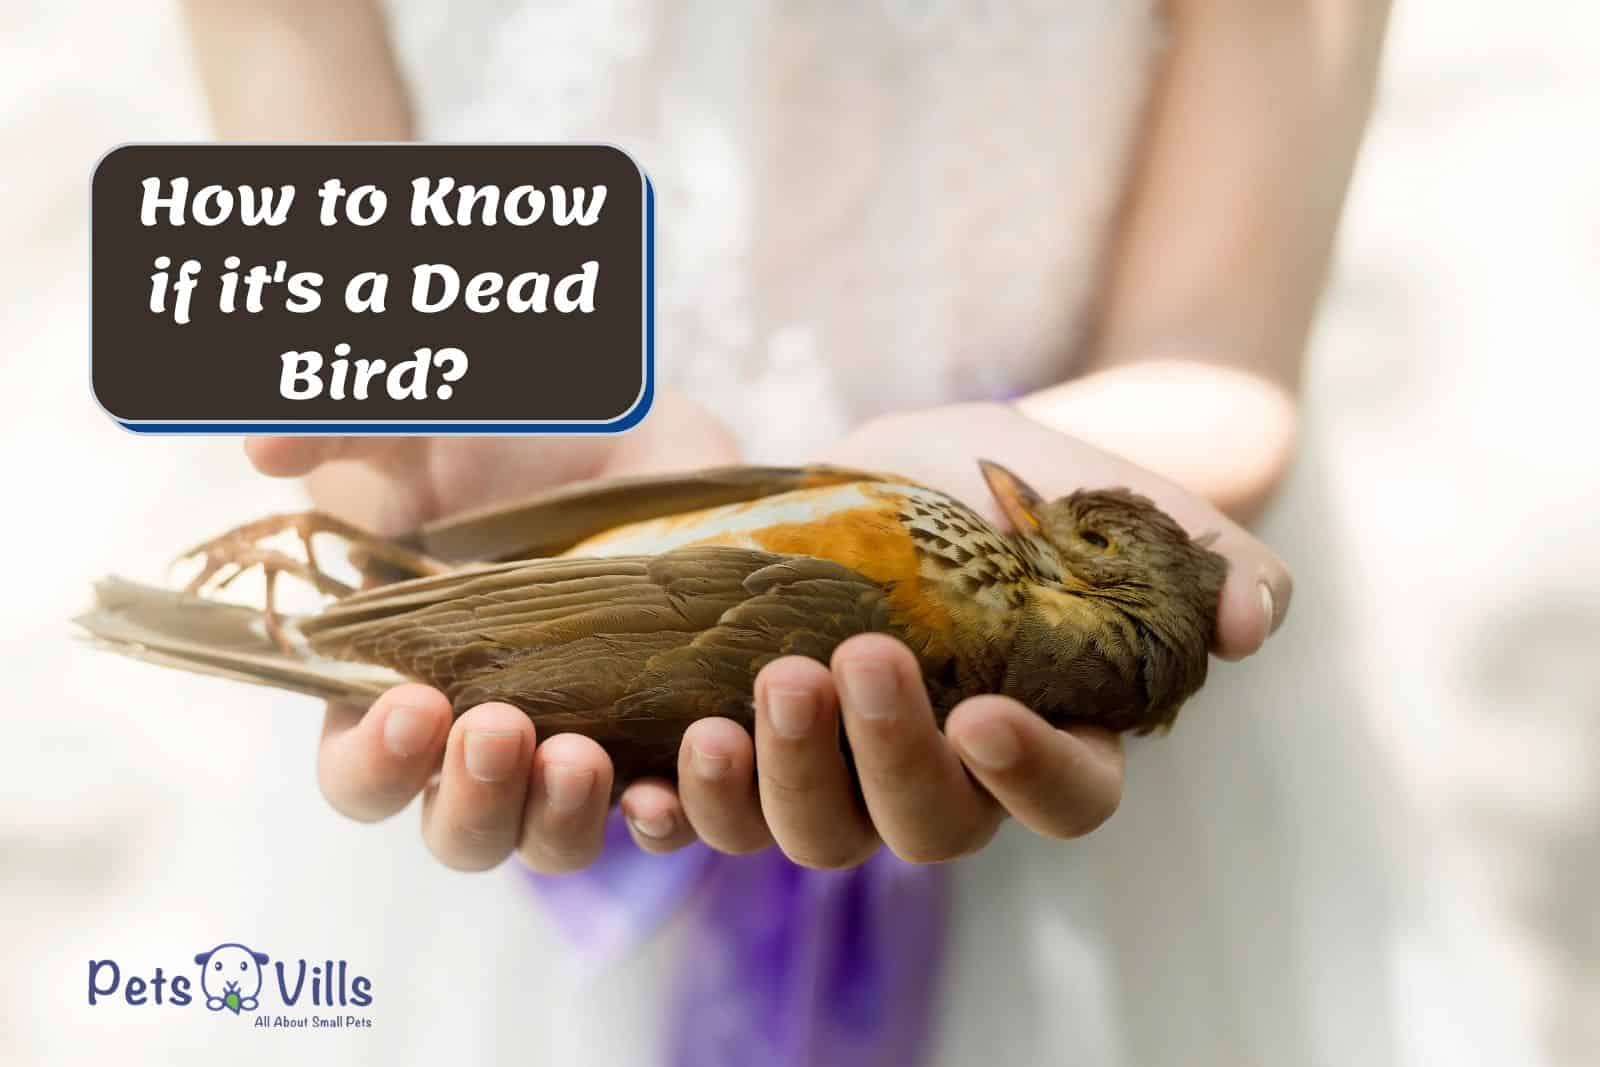 How to Know if it's a Dead Bird